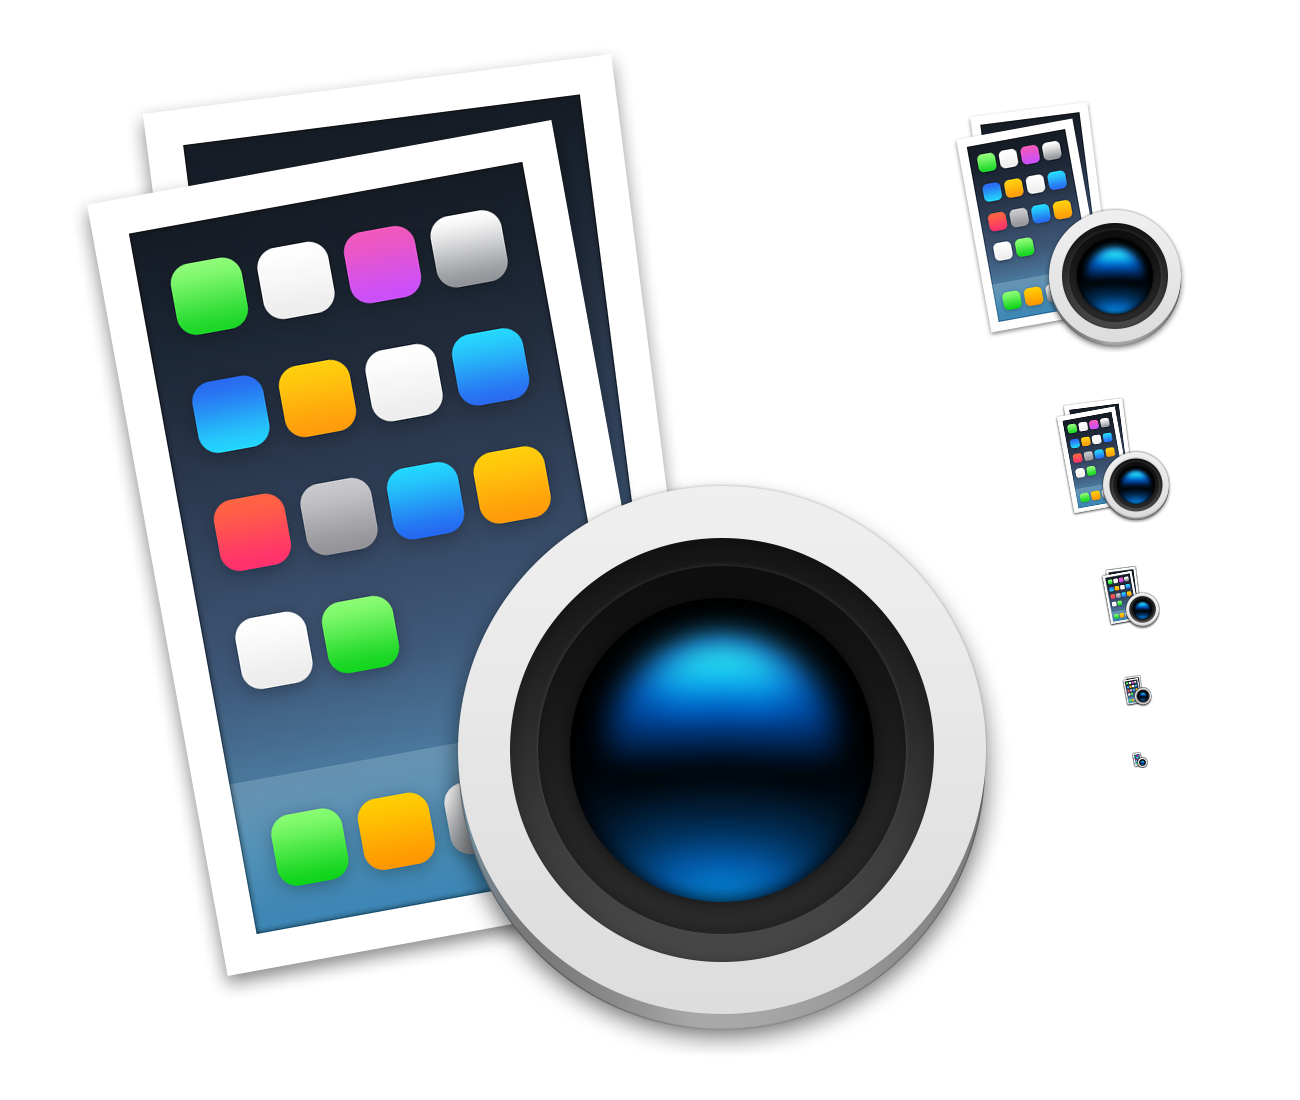 download the last version for ios Capture One 23 Pro 16.2.2.1406